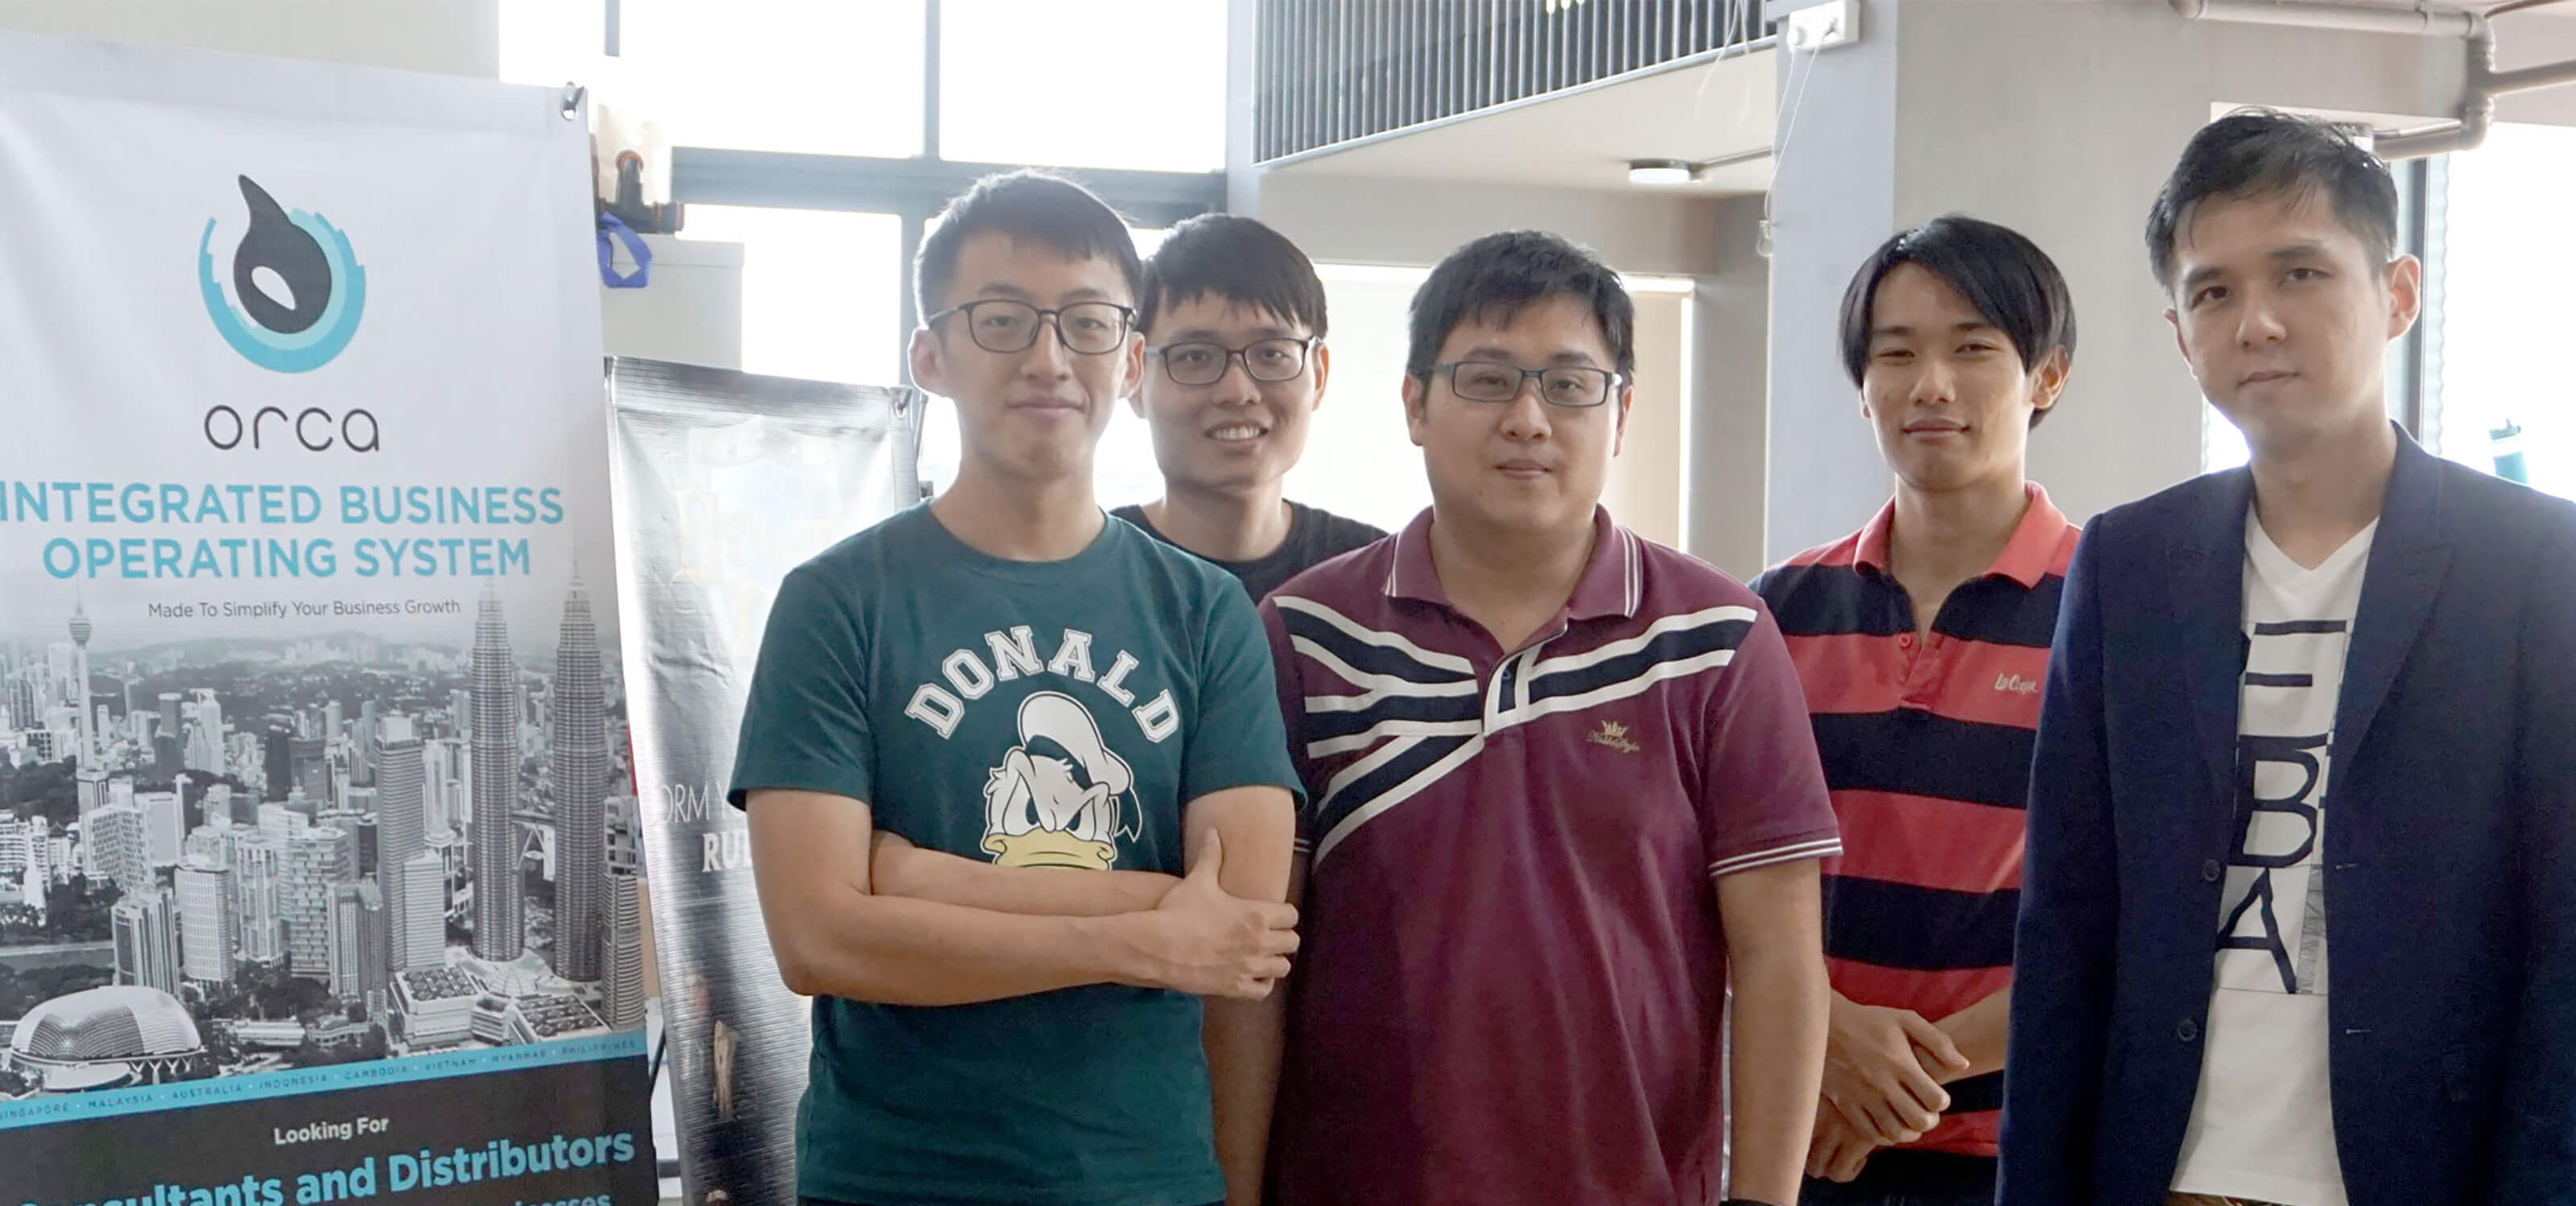 A group of DigiPen (Singapore) alumni pose next to a banner advertising the ORCA Integrated Business Operating System